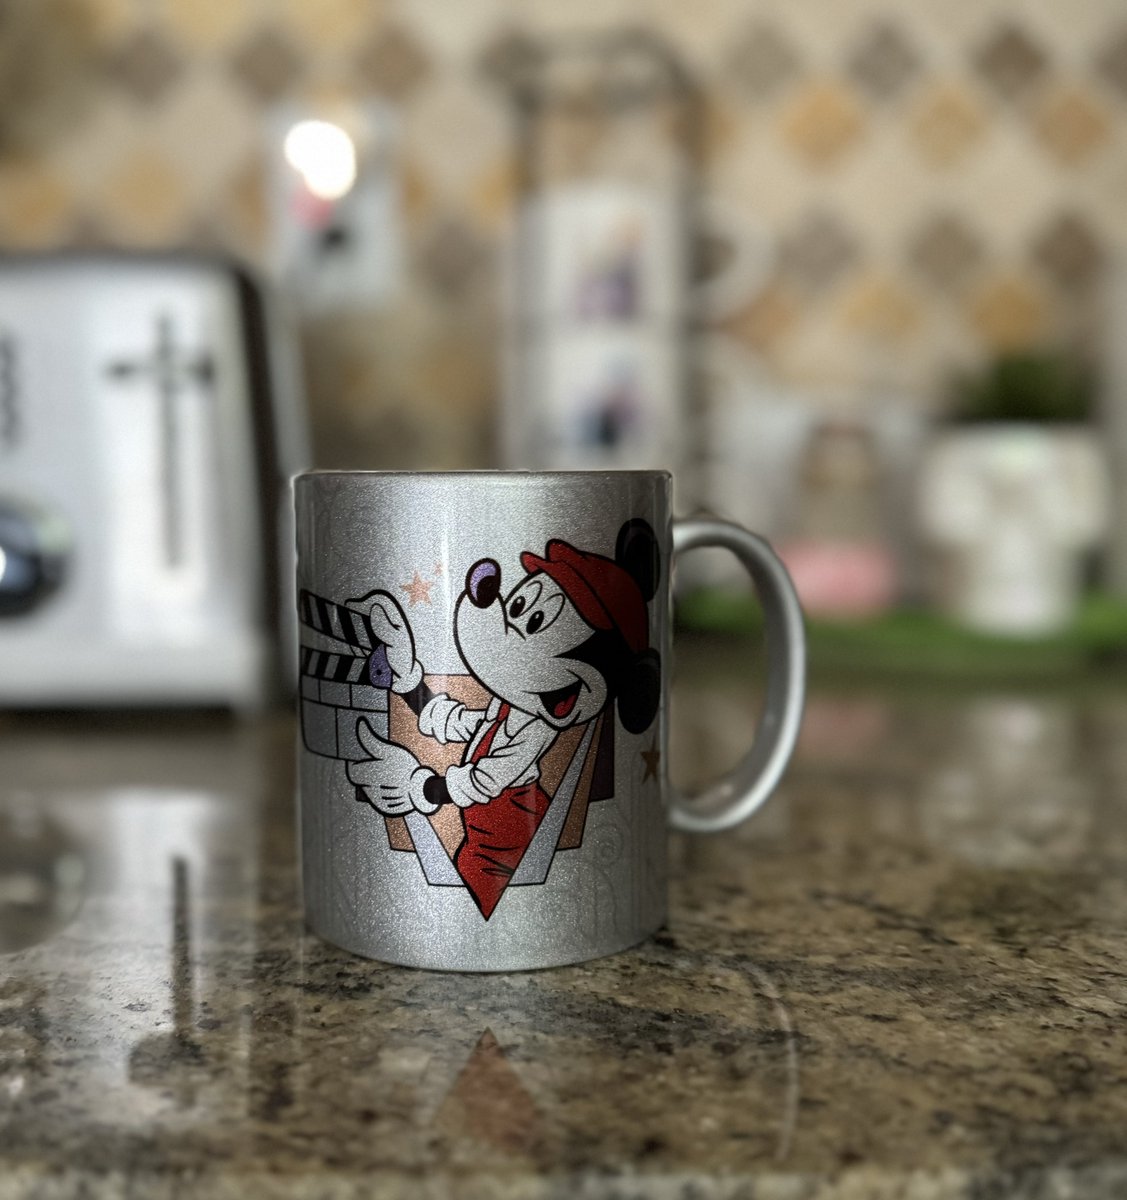 @kermitplaysbass I love that we still have a mug that kind of has a deconstructed version of that logo but with old timey filmmaker Mickey.